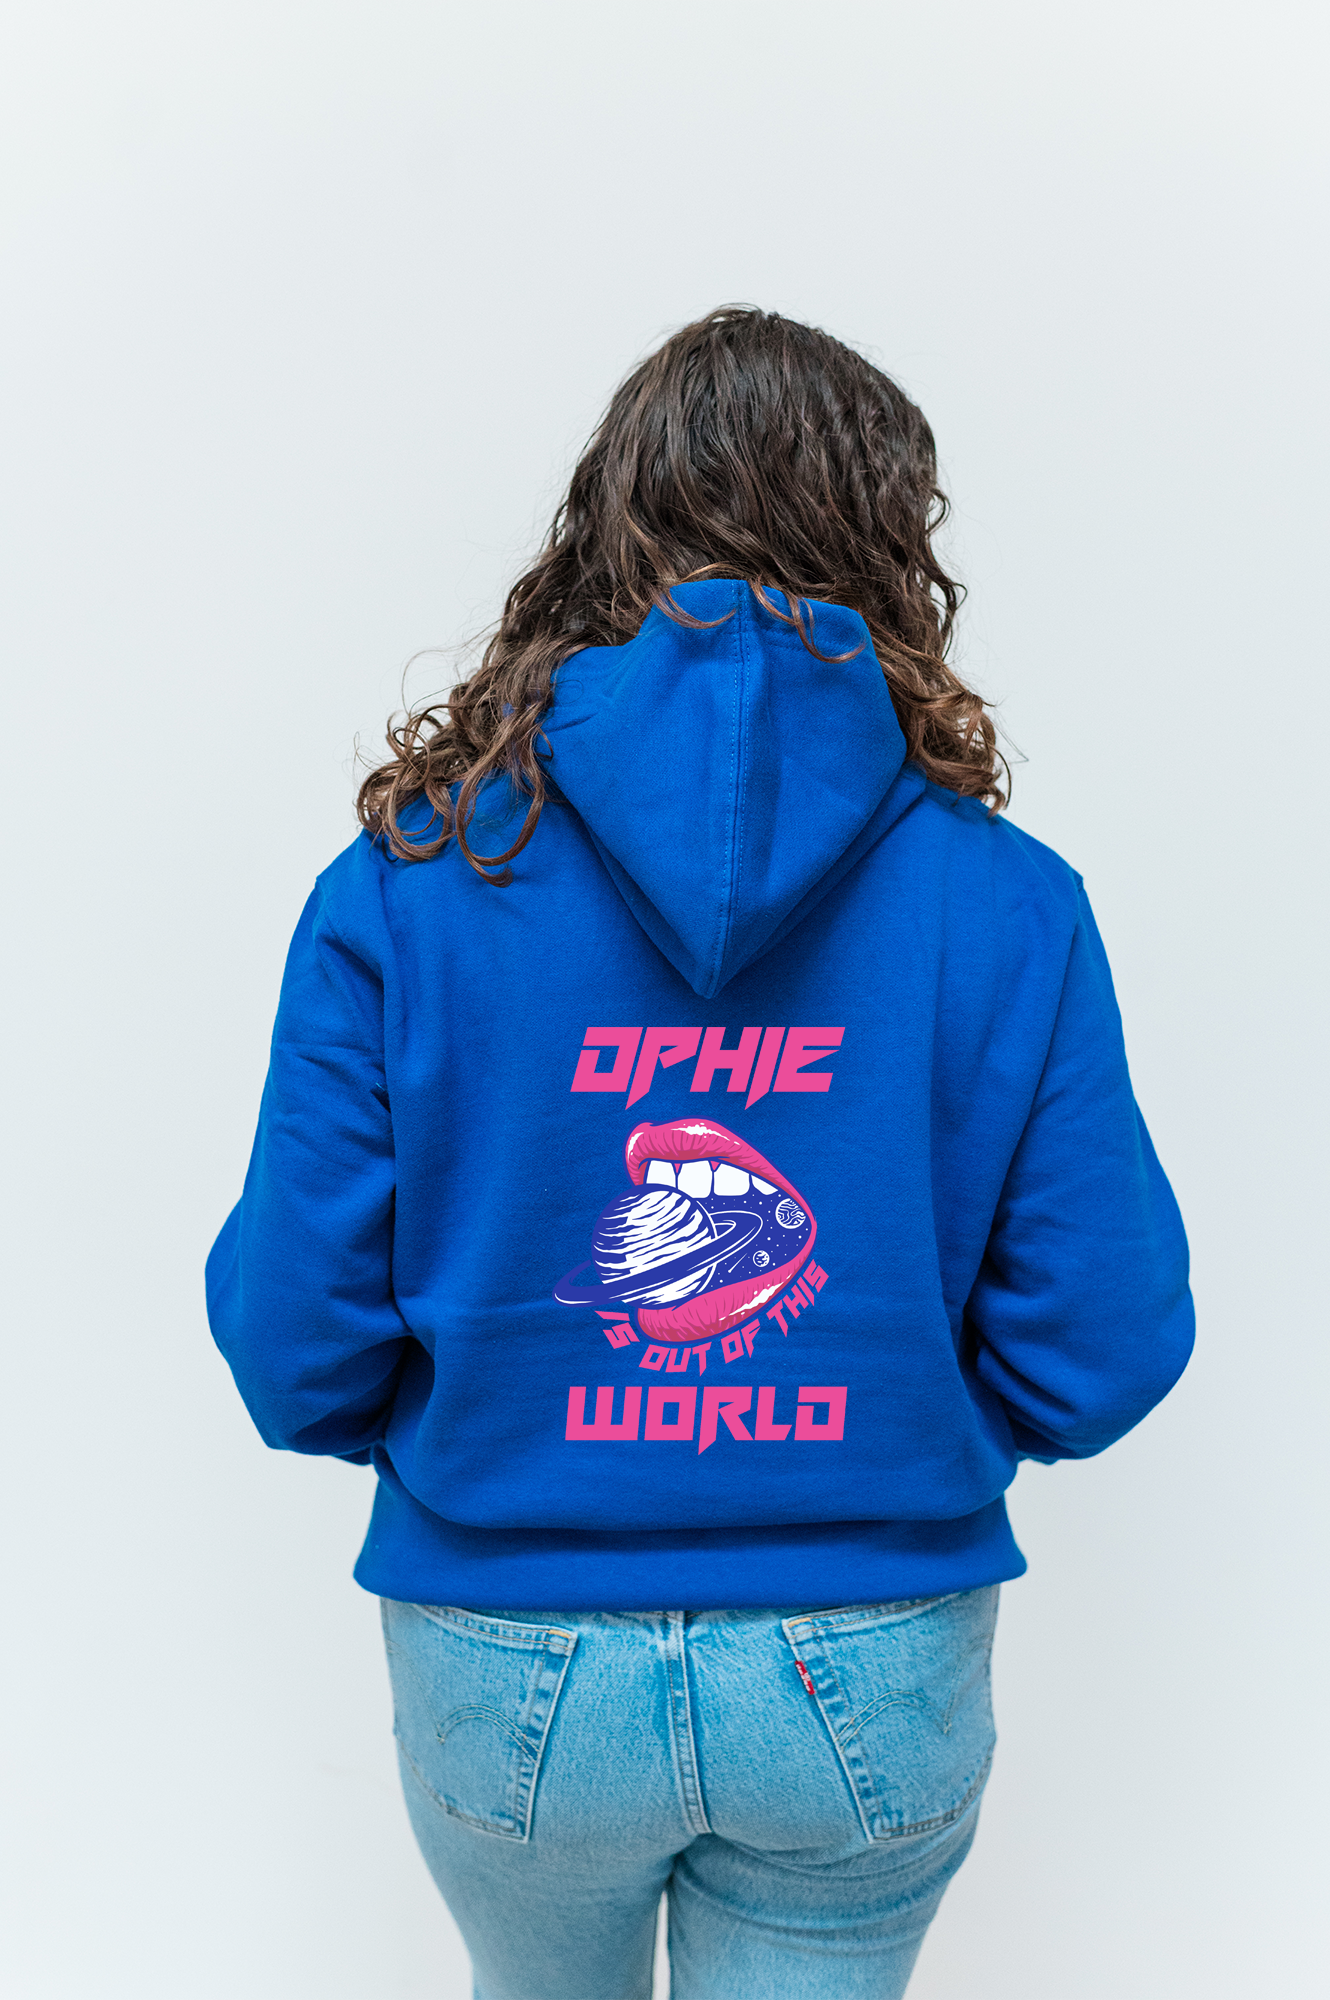 the back of a woman wearing a blue hoodie